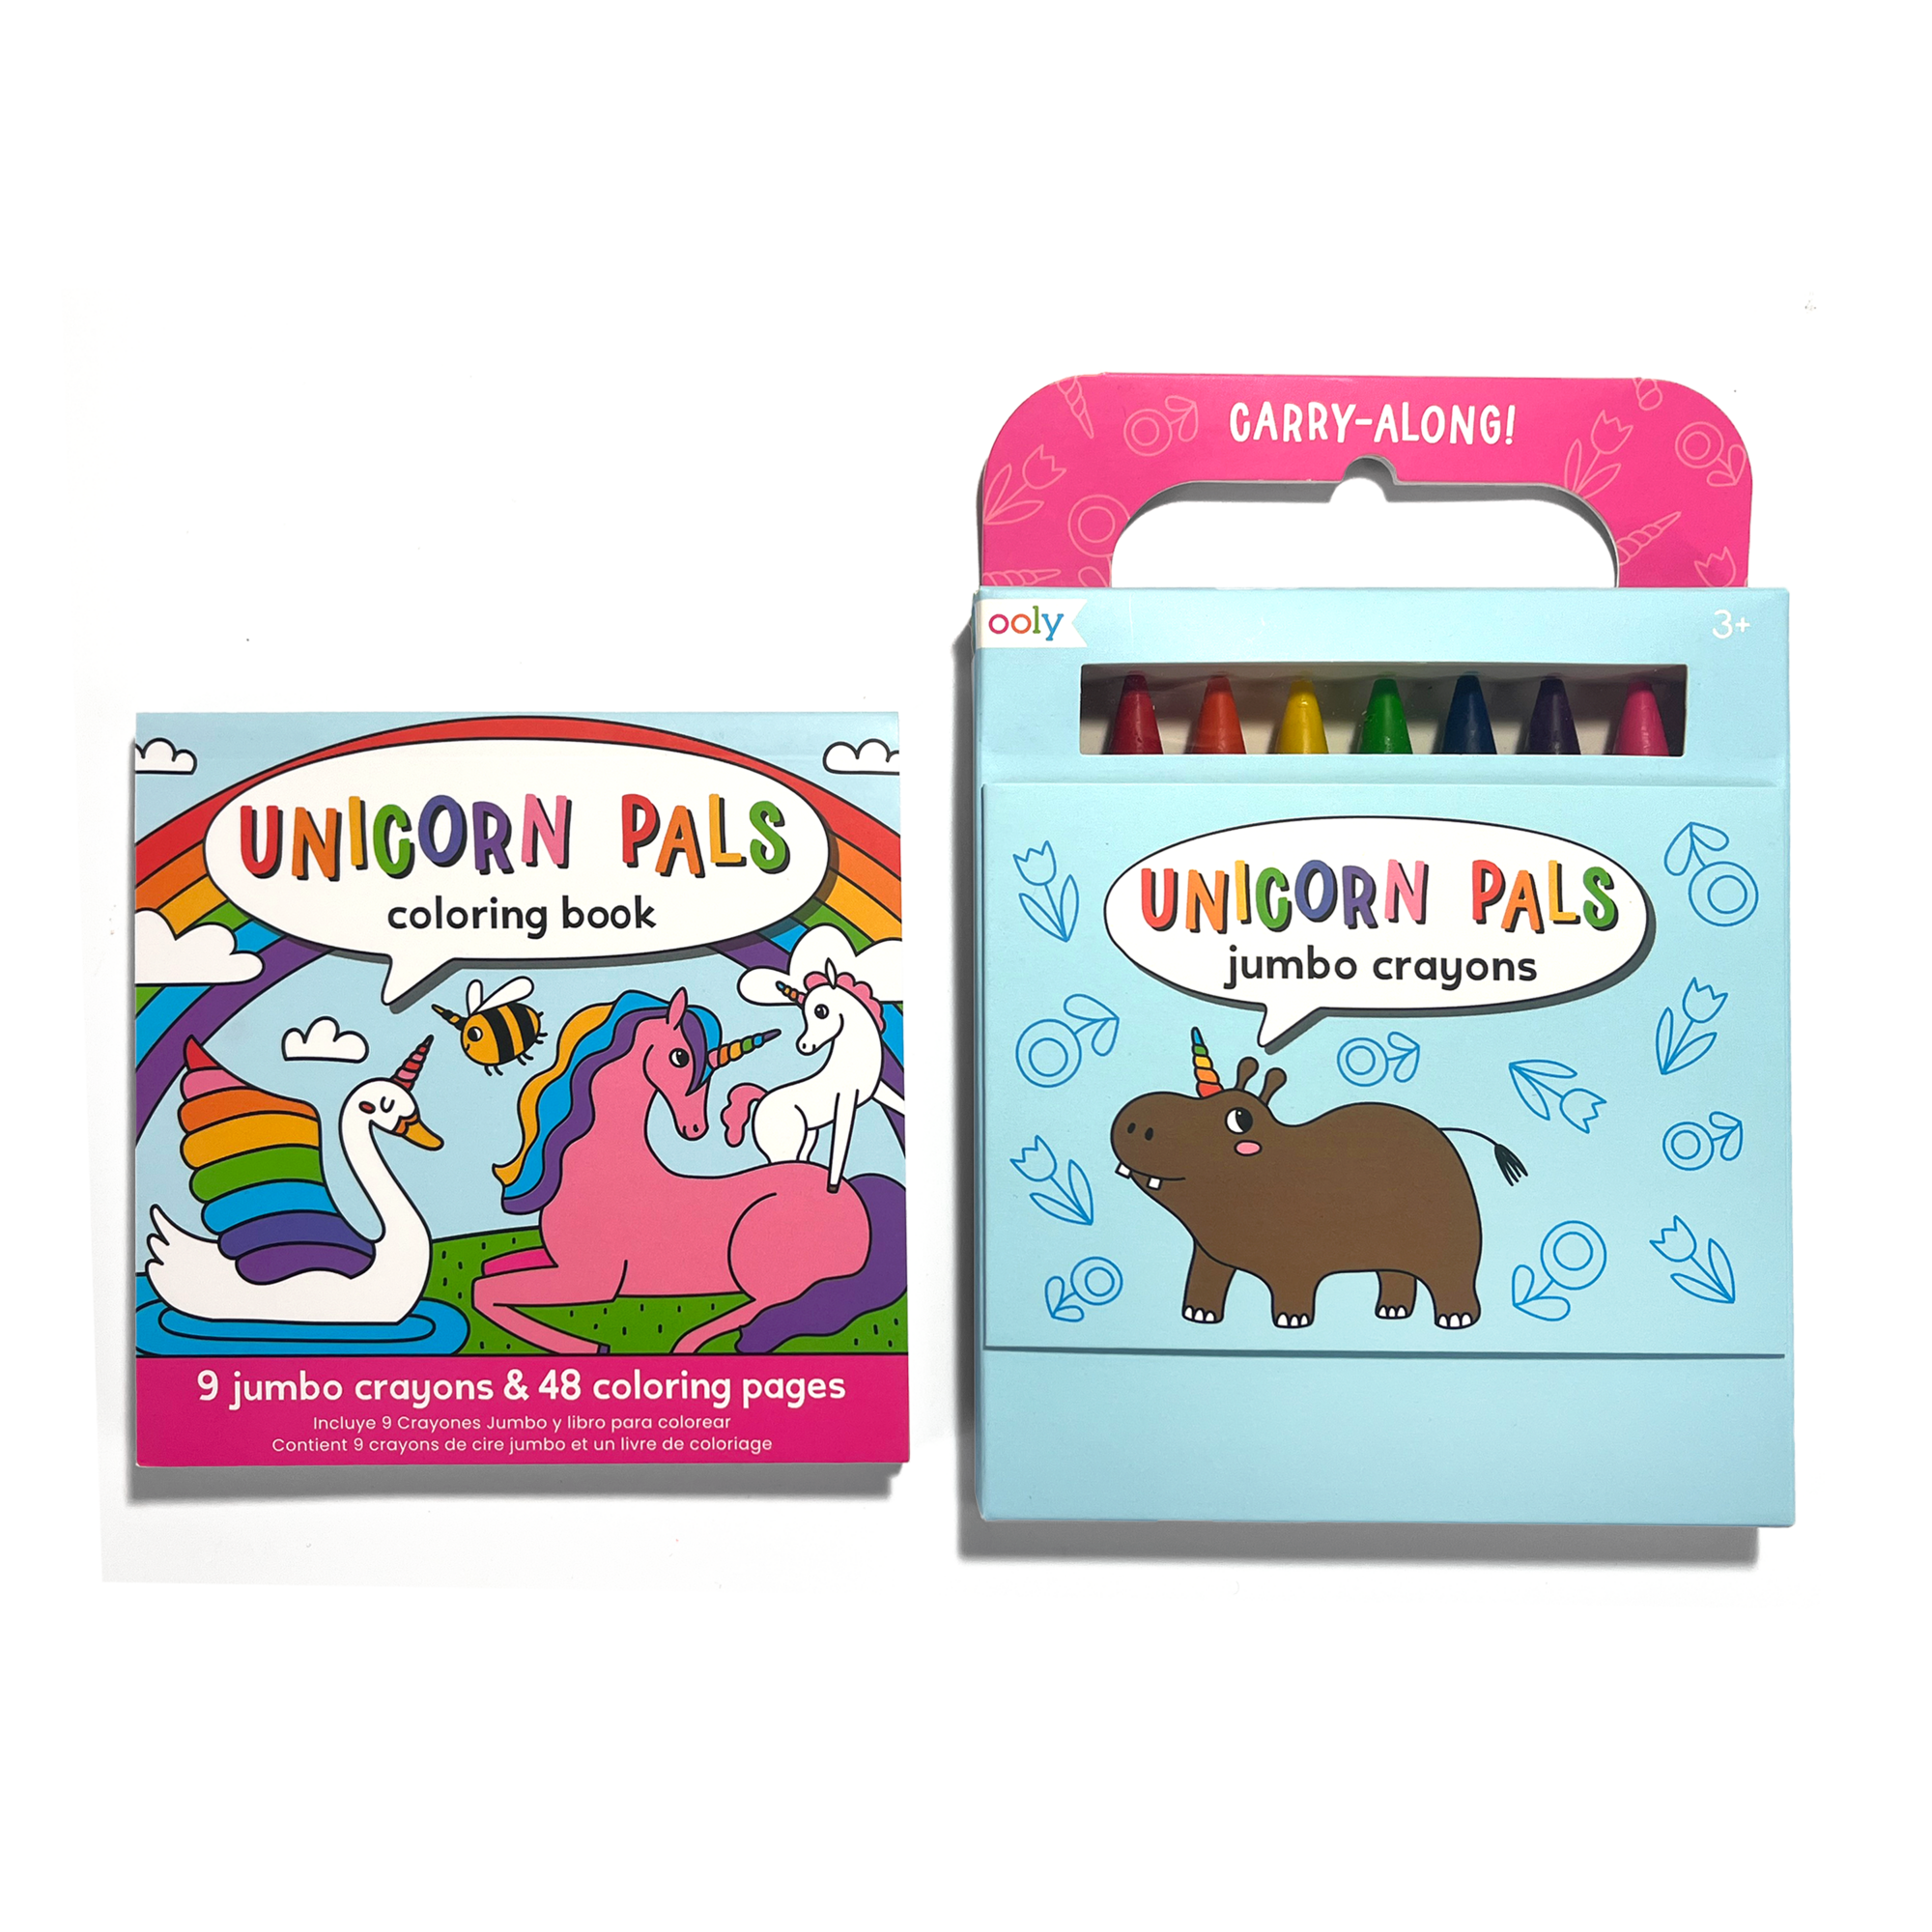 OOLY Carry Along! Coloring Book and Crayon Set - Unicorn Pals with coloring book and crayon set side-by-side